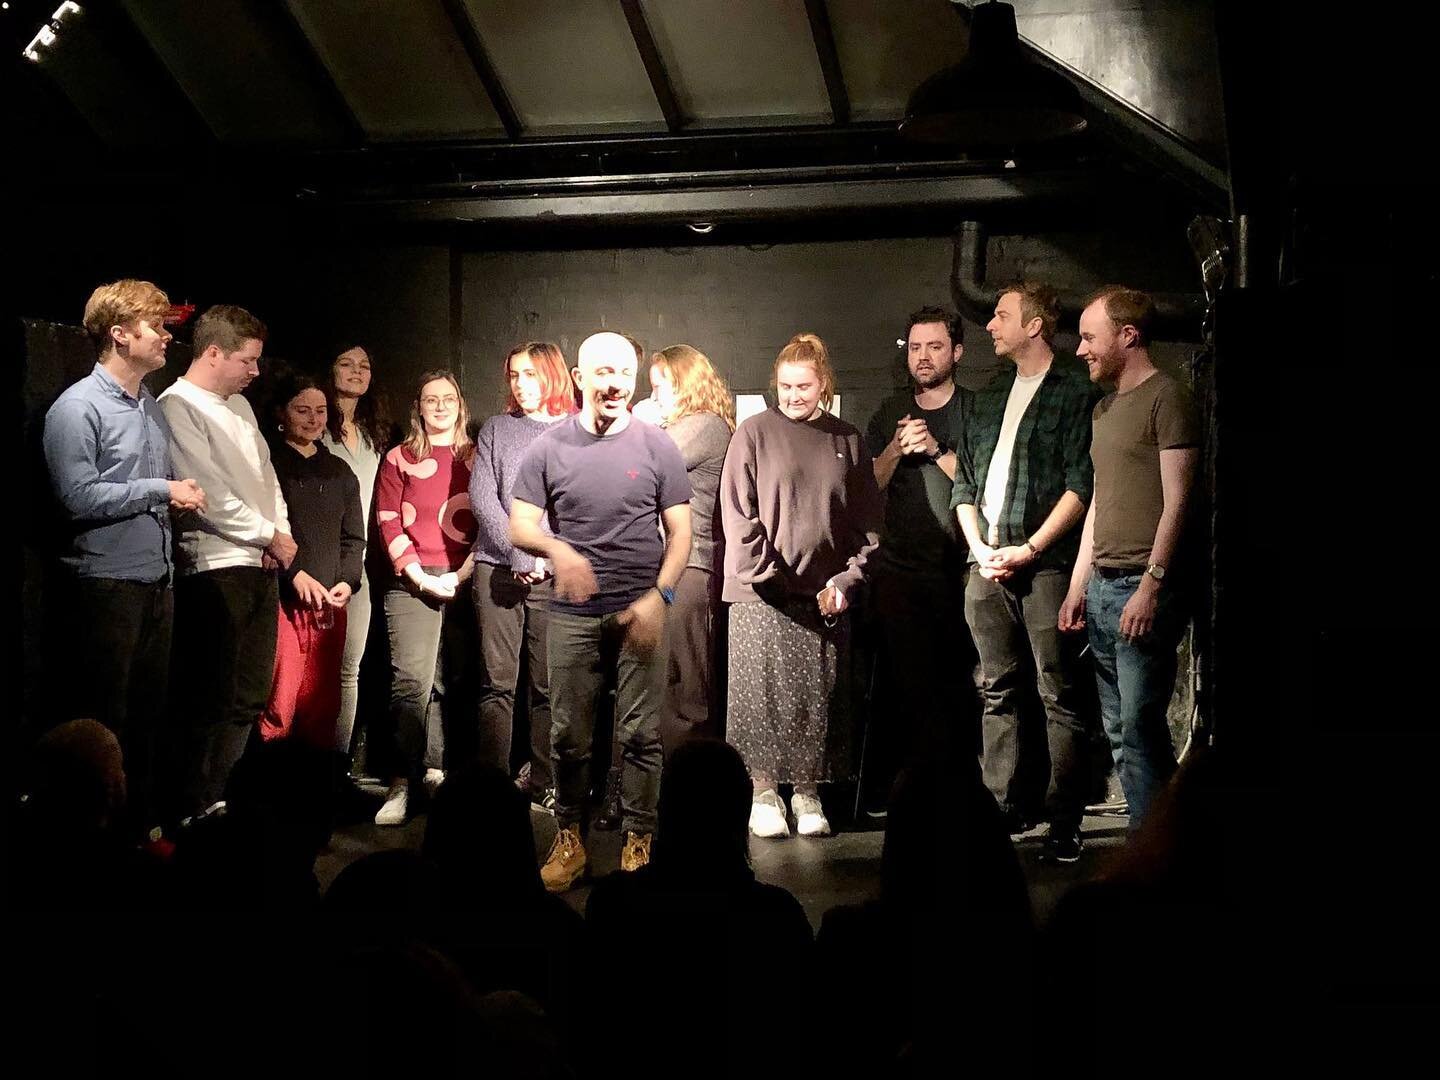 What an amazing, silly, chocolate-filled night we had yesterday at @2northdown! Thank you to everyone who came and all the wonderful performers and tech who made it such a fun night ❤️🥳😆 #shinythingscomedy #improv #clown #livecomedy #londonimprov #